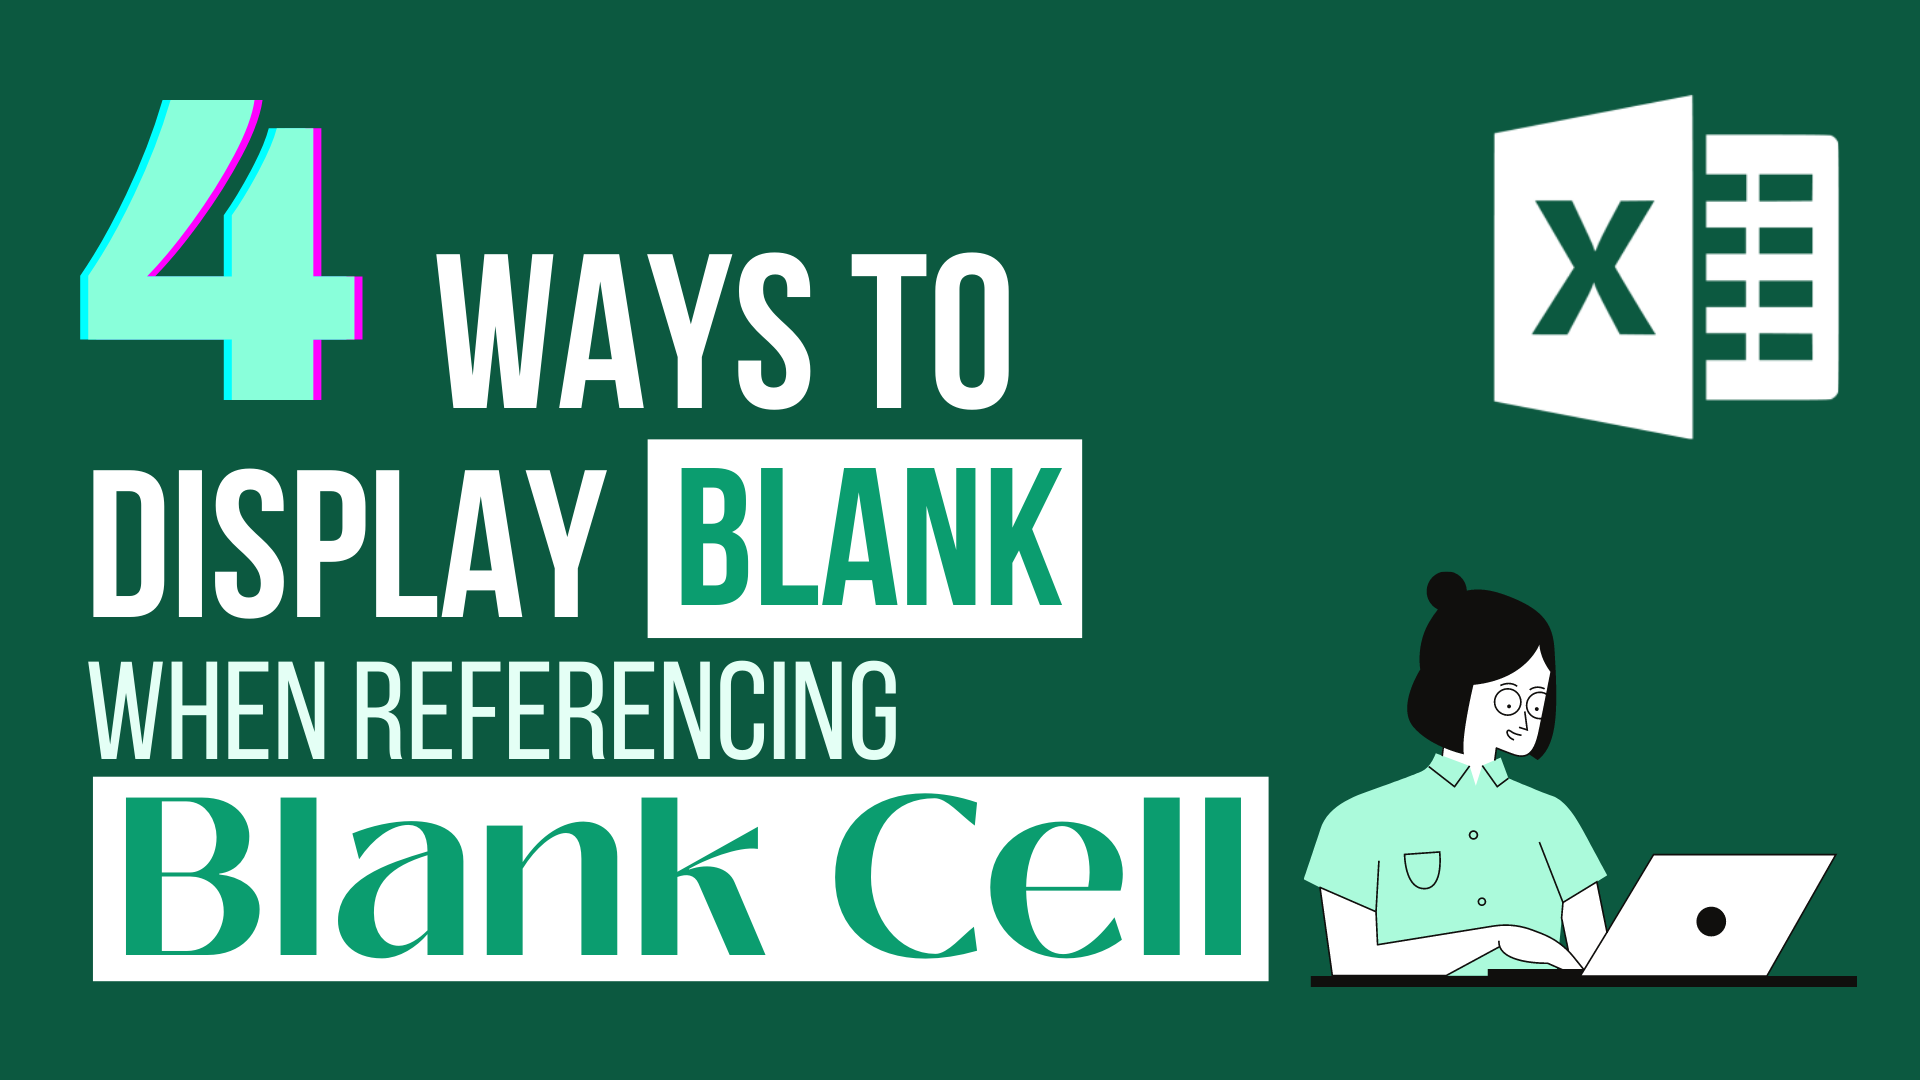 How to Display Blank when Referencing Blank Cell